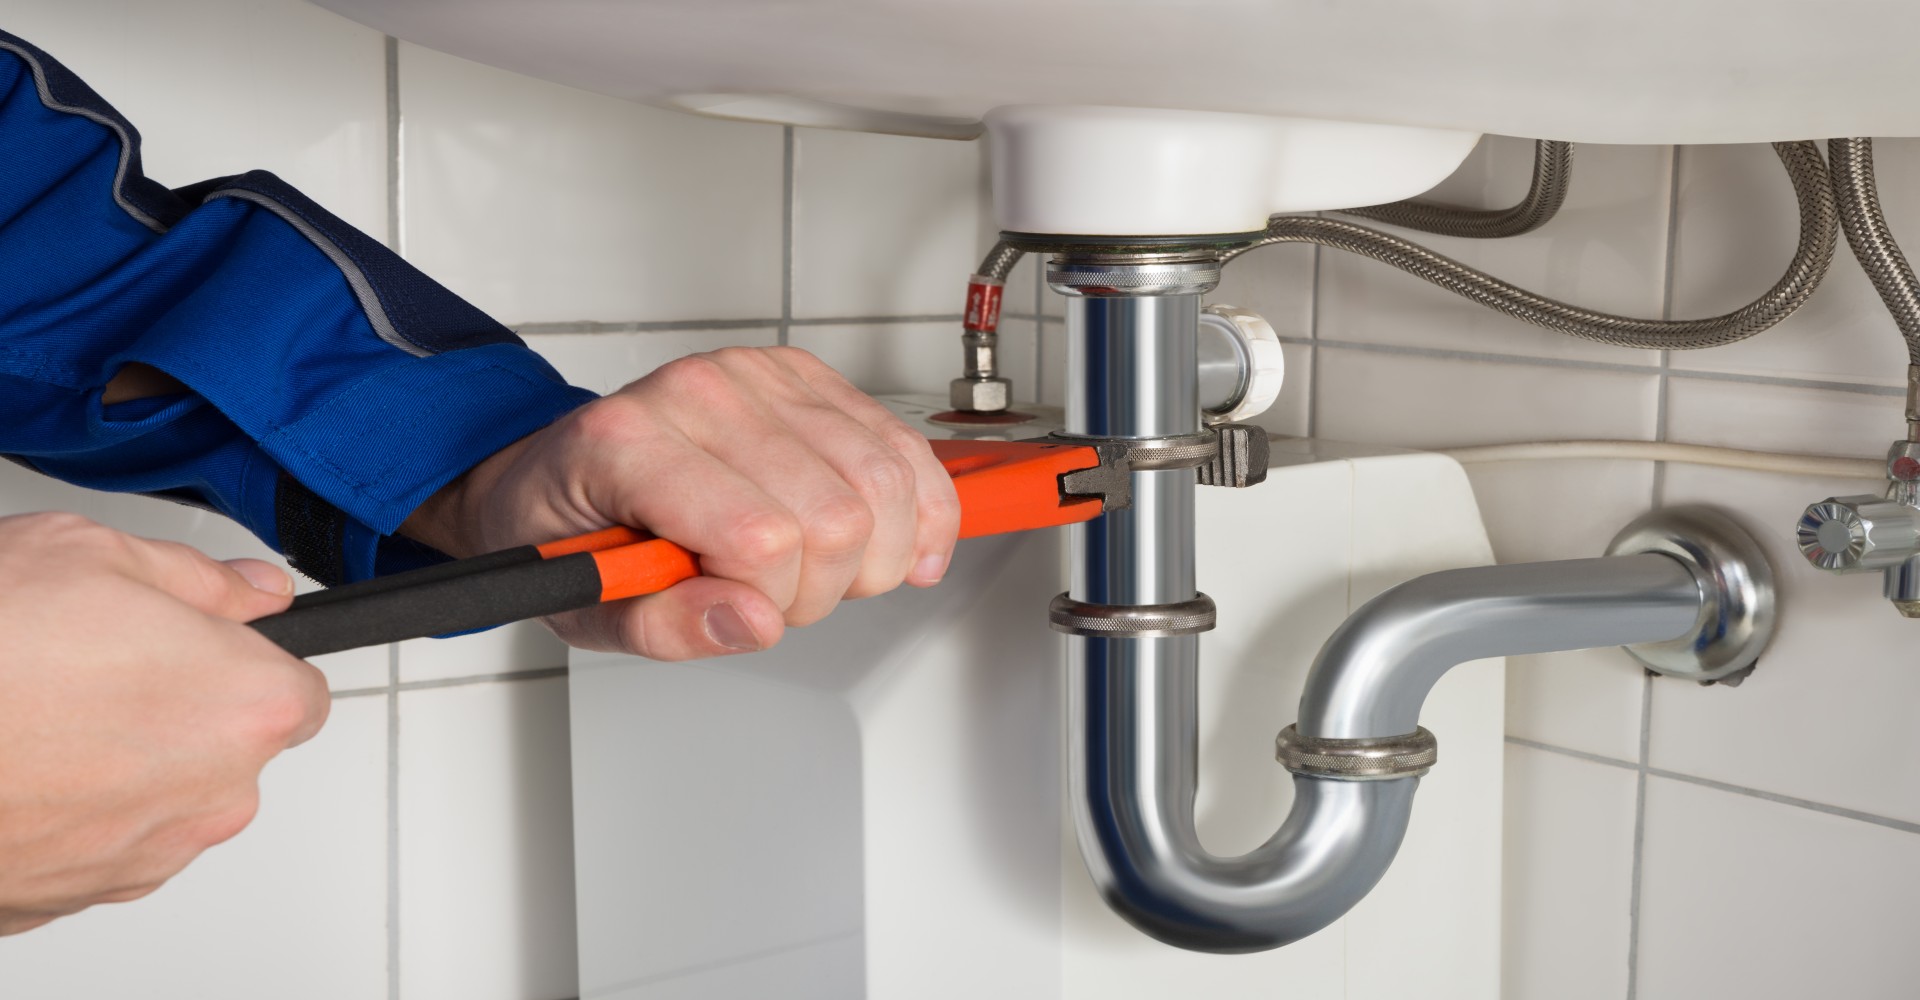 How important is plumbing at home?